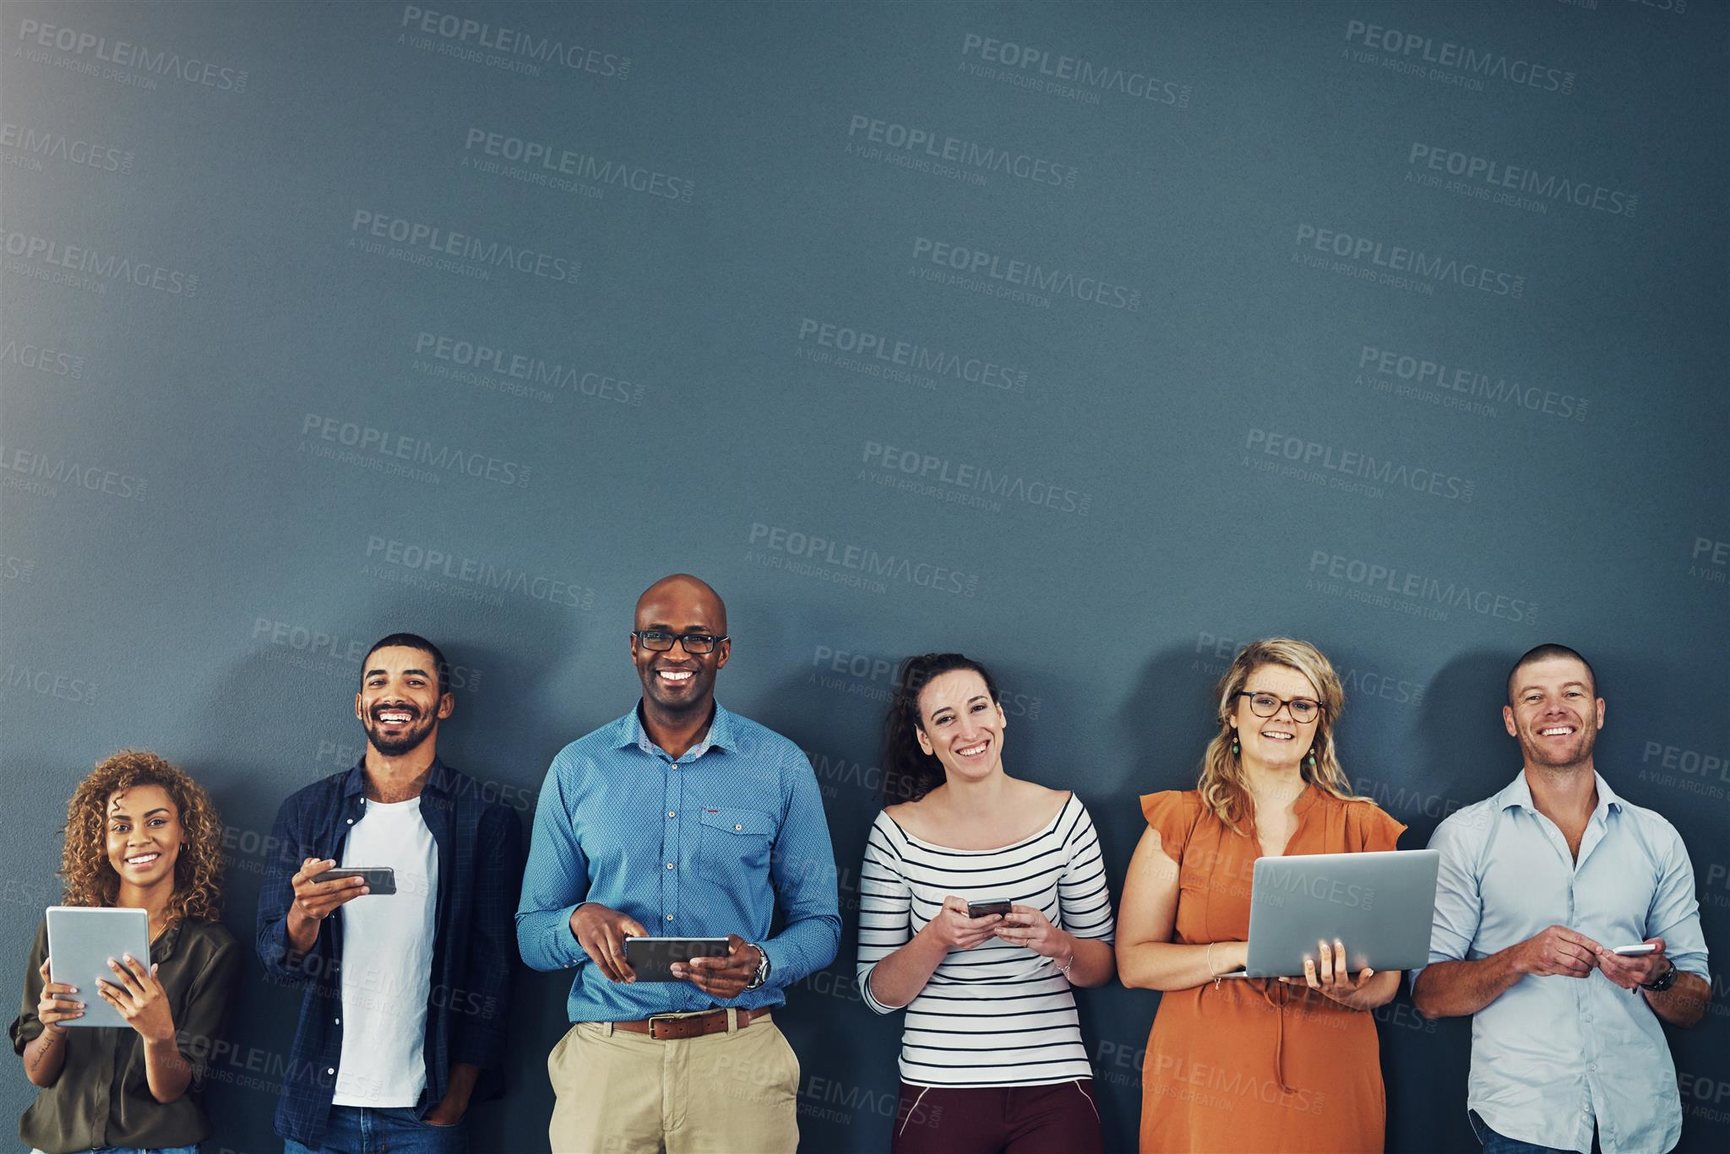 Buy stock photo Studio shot of a group of diverse people social networking against a gray background